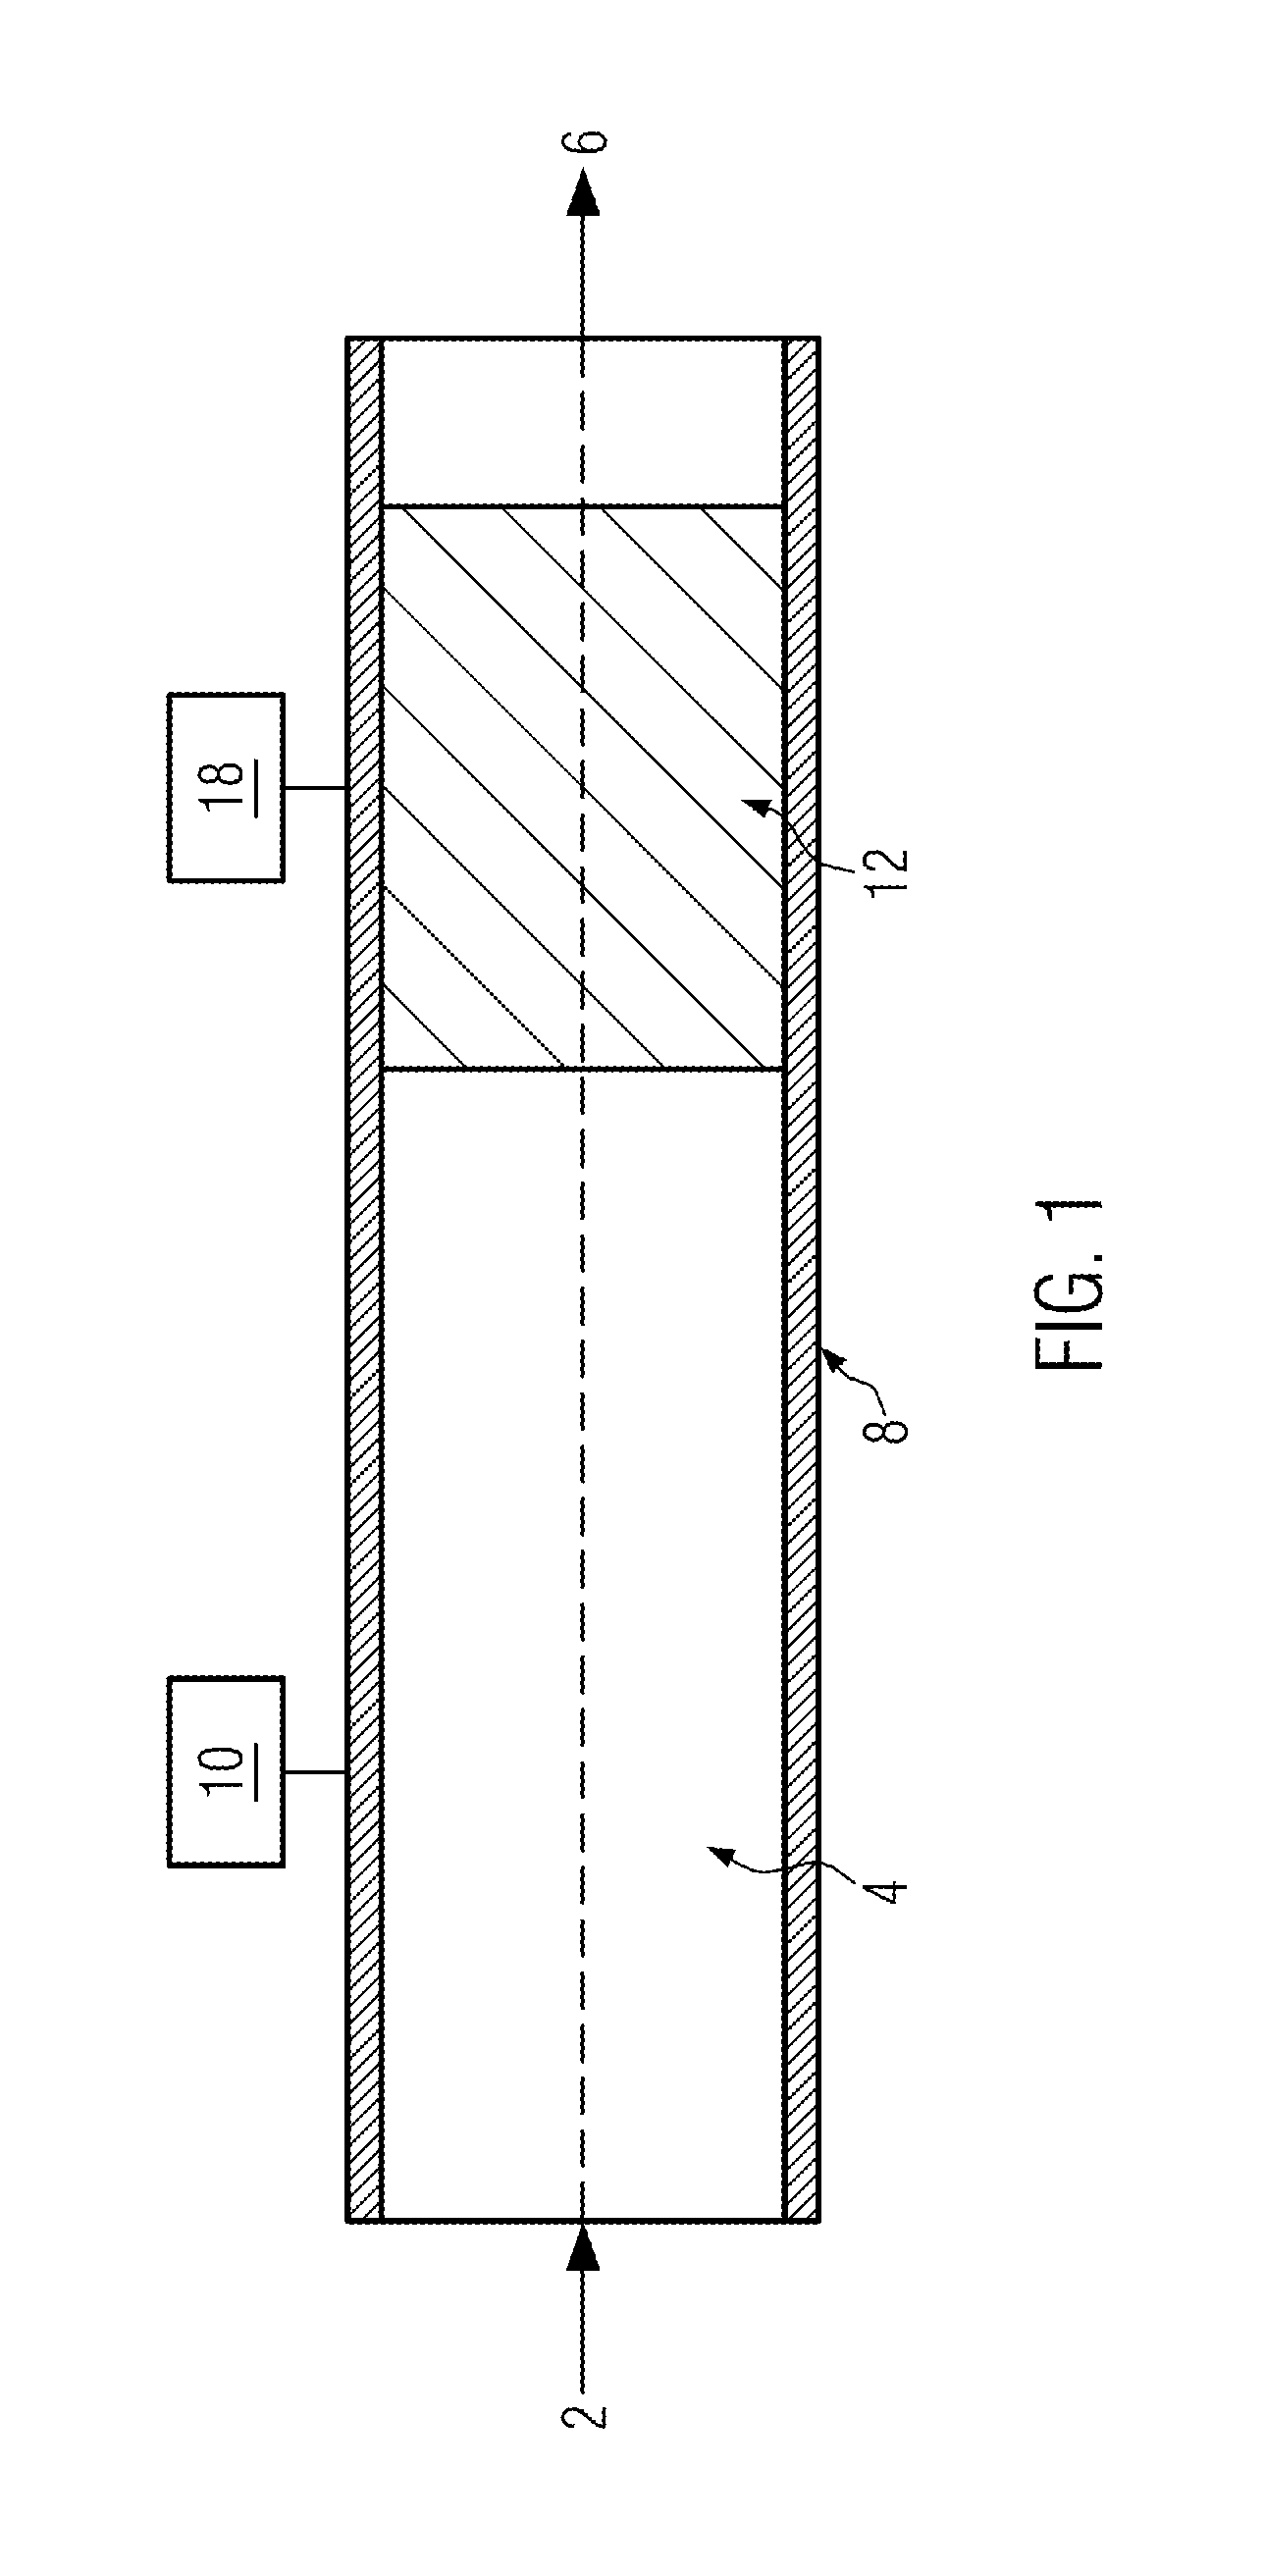 Apparatus and method for purifying thermoplastic polymers